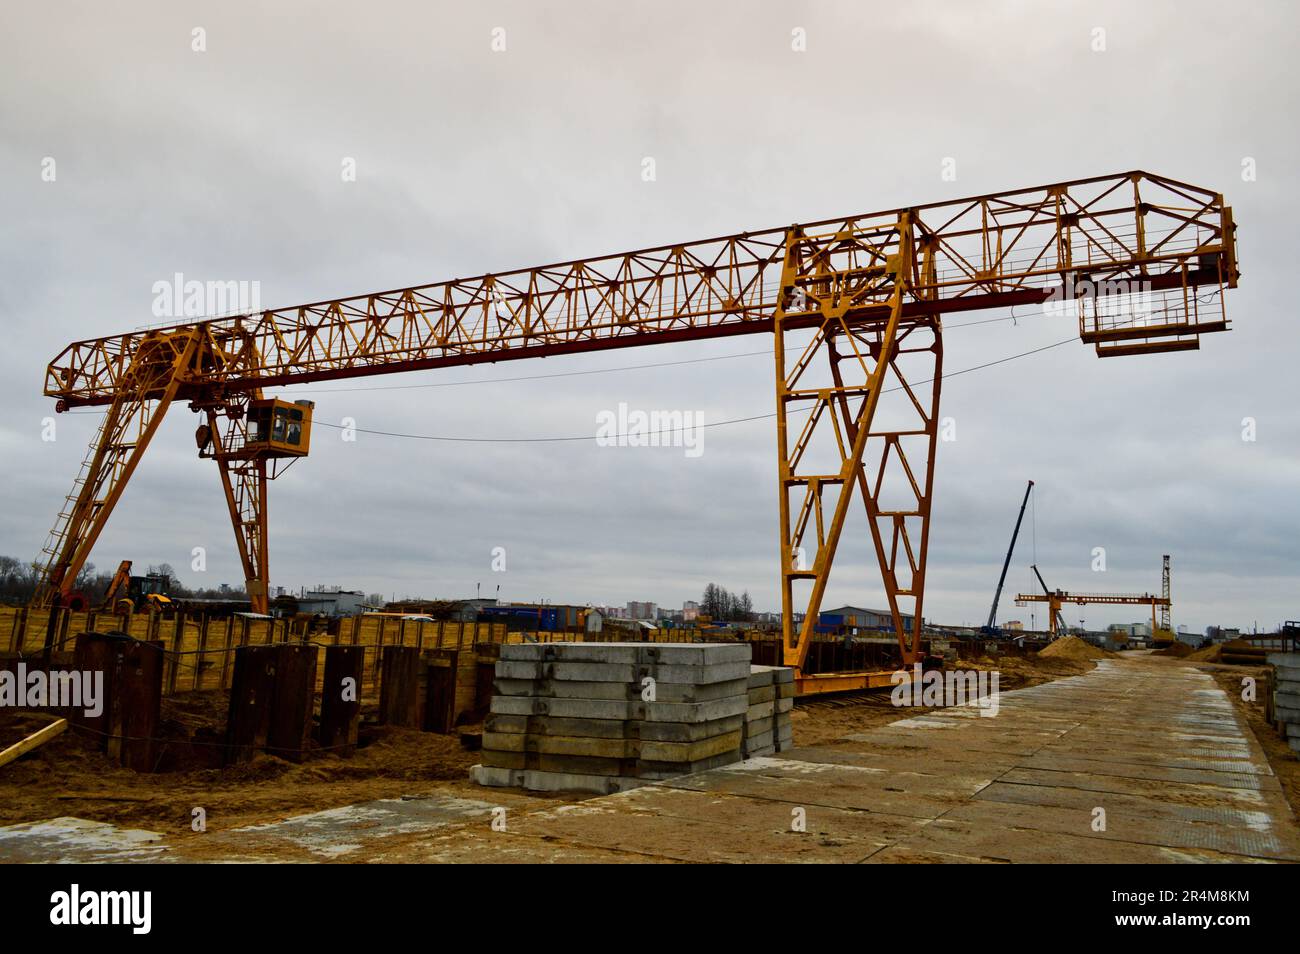 High heavy yellow metal iron load-bearing construction stationary industrial powerful gantry crane of bridge type on supports for lifting cargo on a m Stock Photo